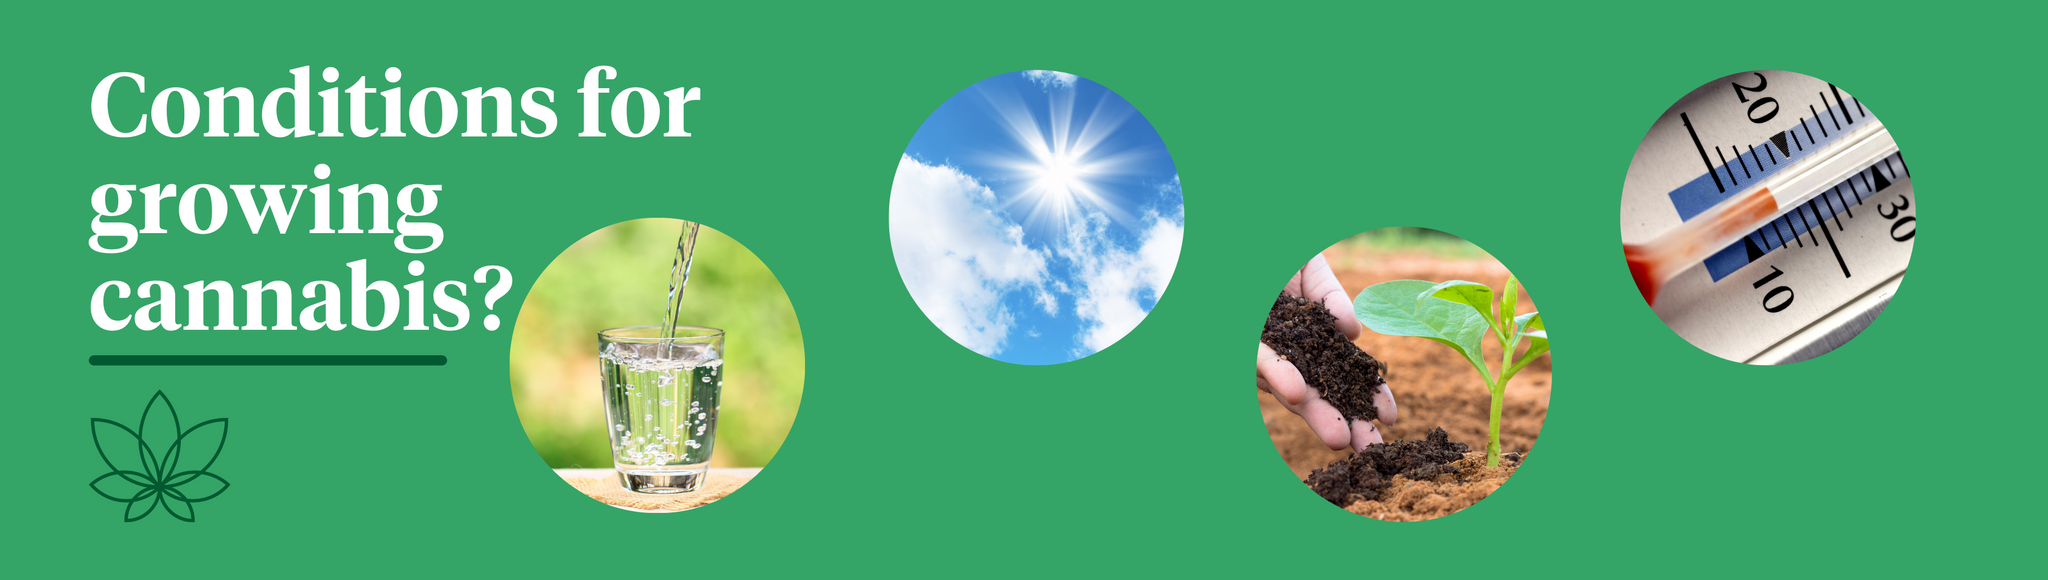 A green background with four images of a glass of water, the sky showing the sun passing over a cloud, a person placing soil and fertiliser underneath a plant and a thermostat. 